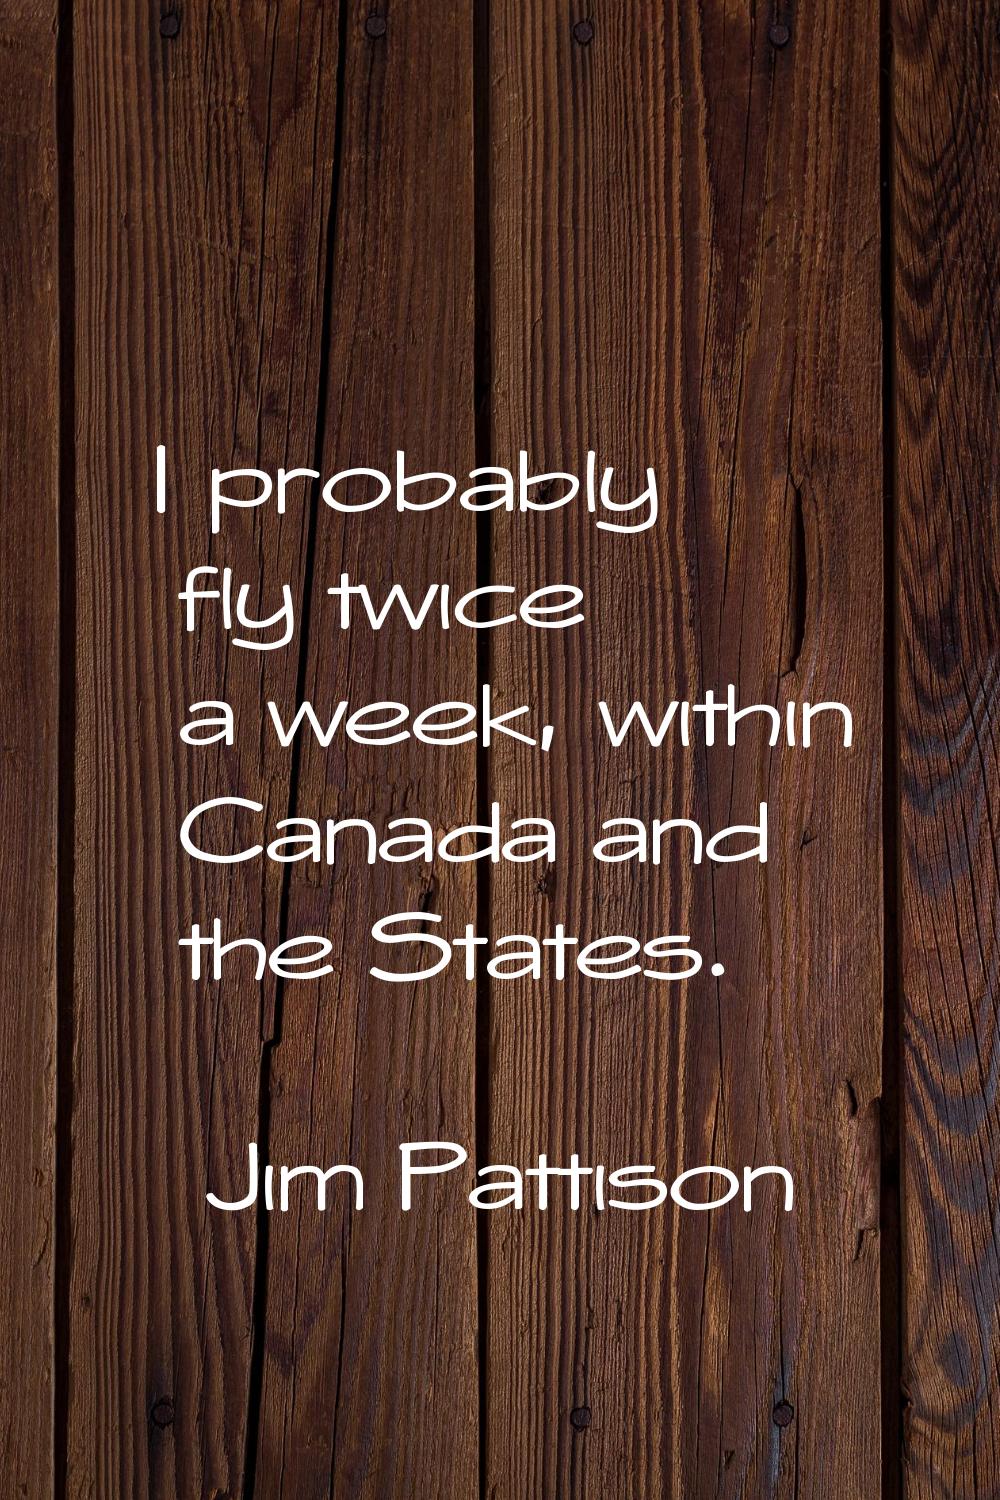 I probably fly twice a week, within Canada and the States.